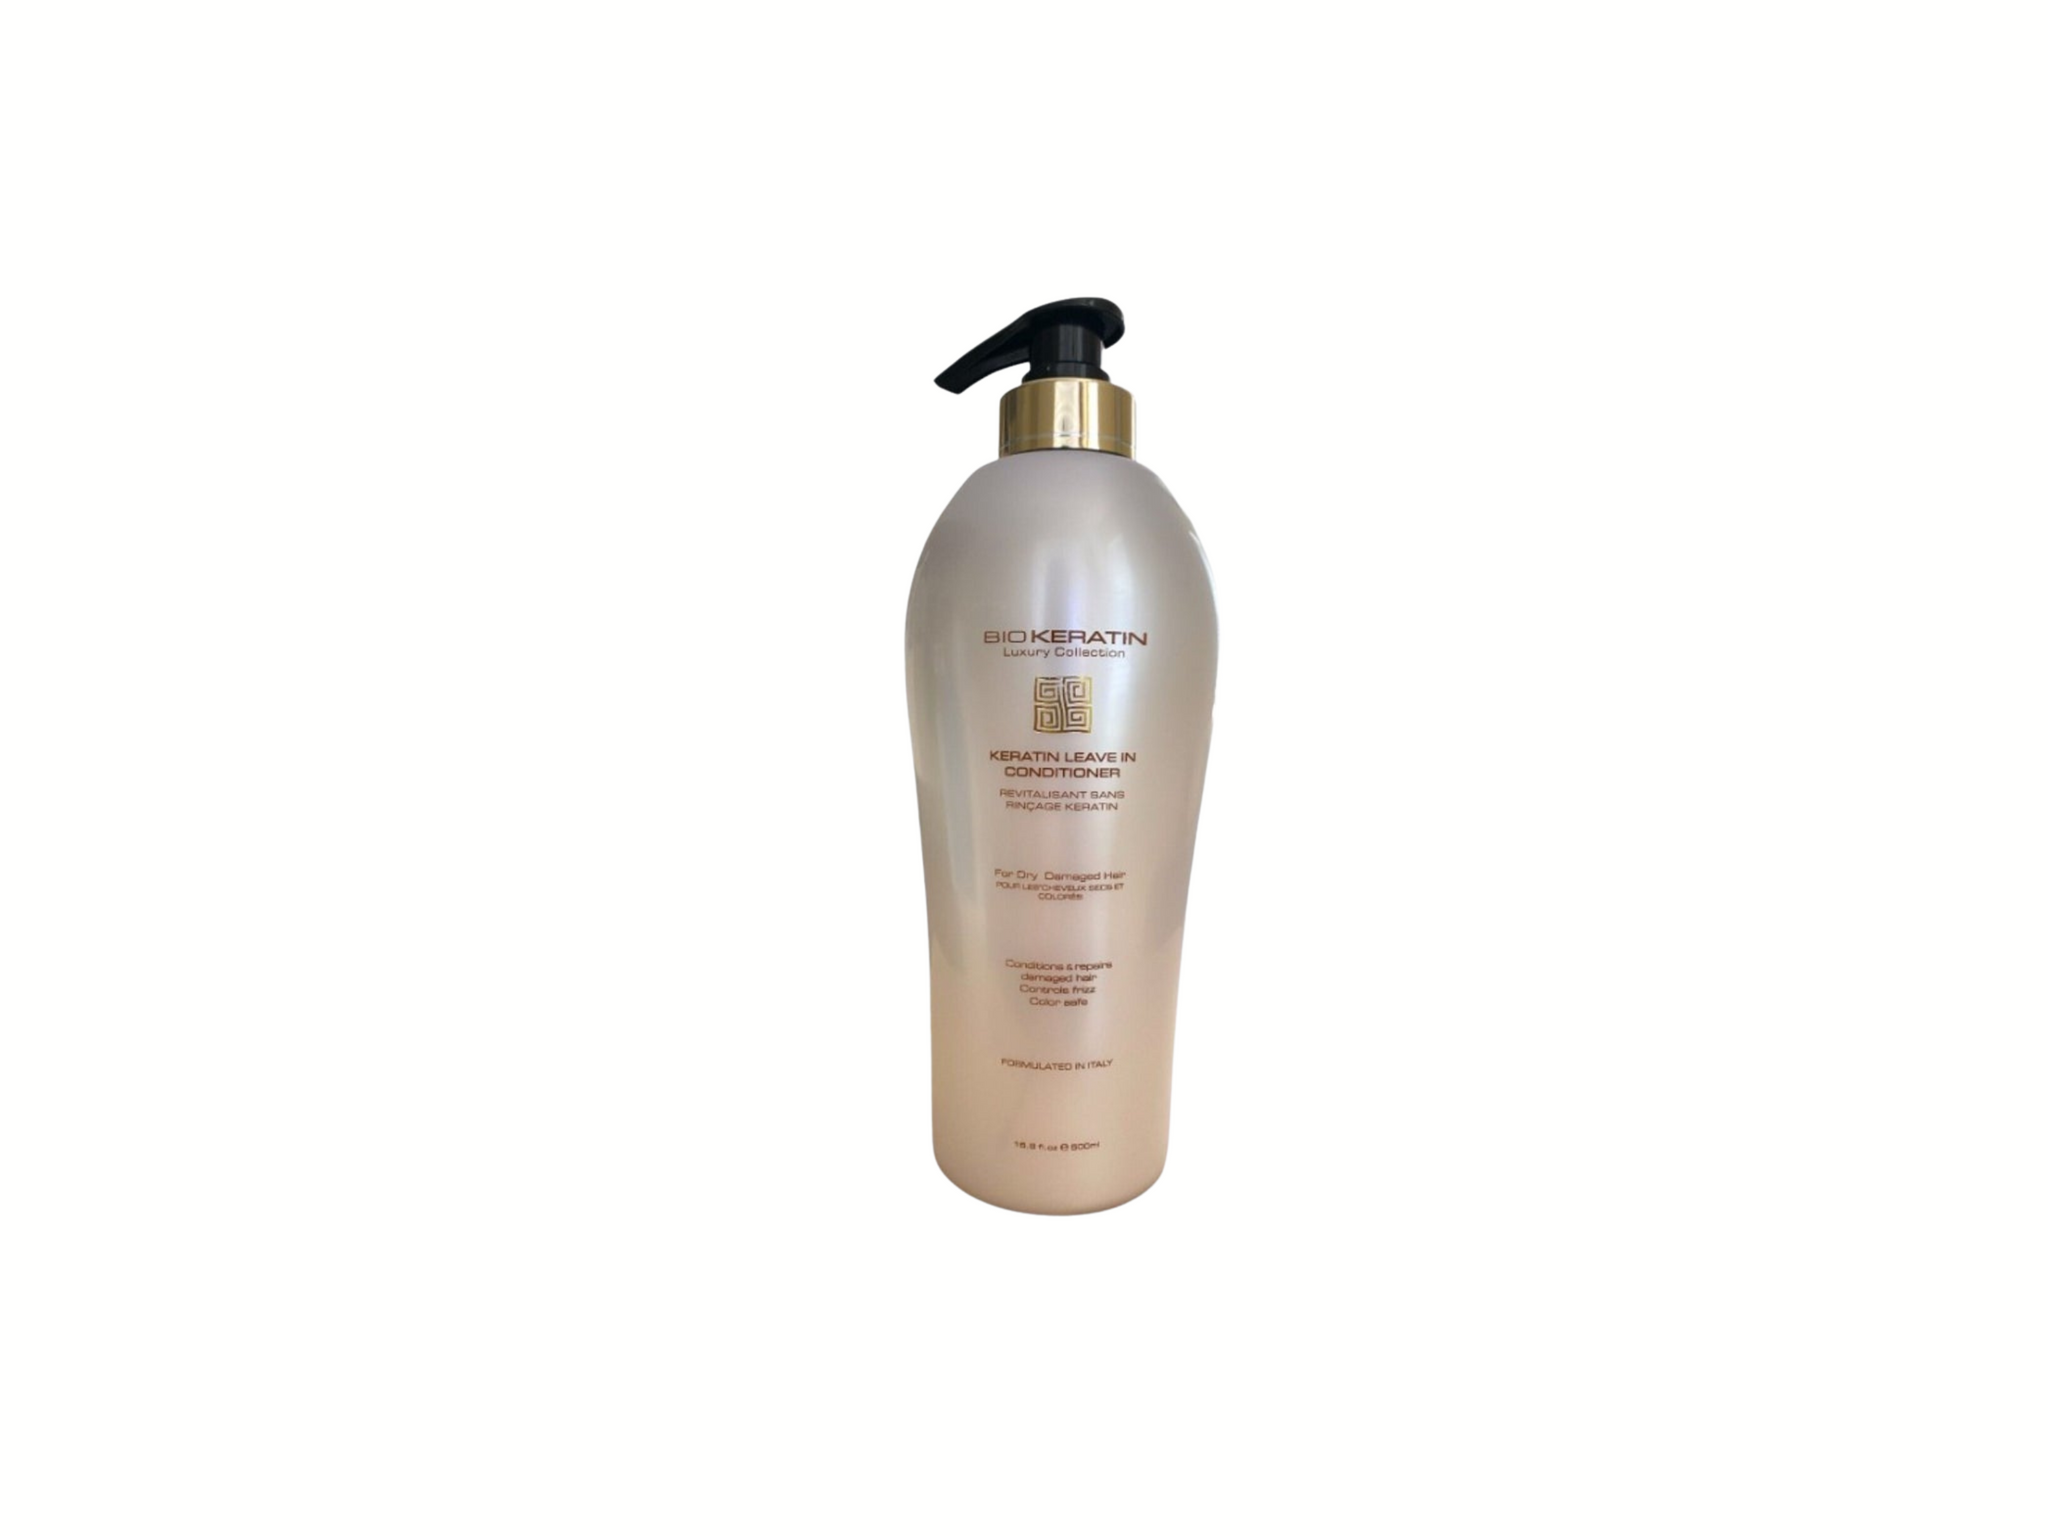 BIOKERATIN BOTANICAL COLLECTION KERATIN LEAVE-IN CONDITIONER